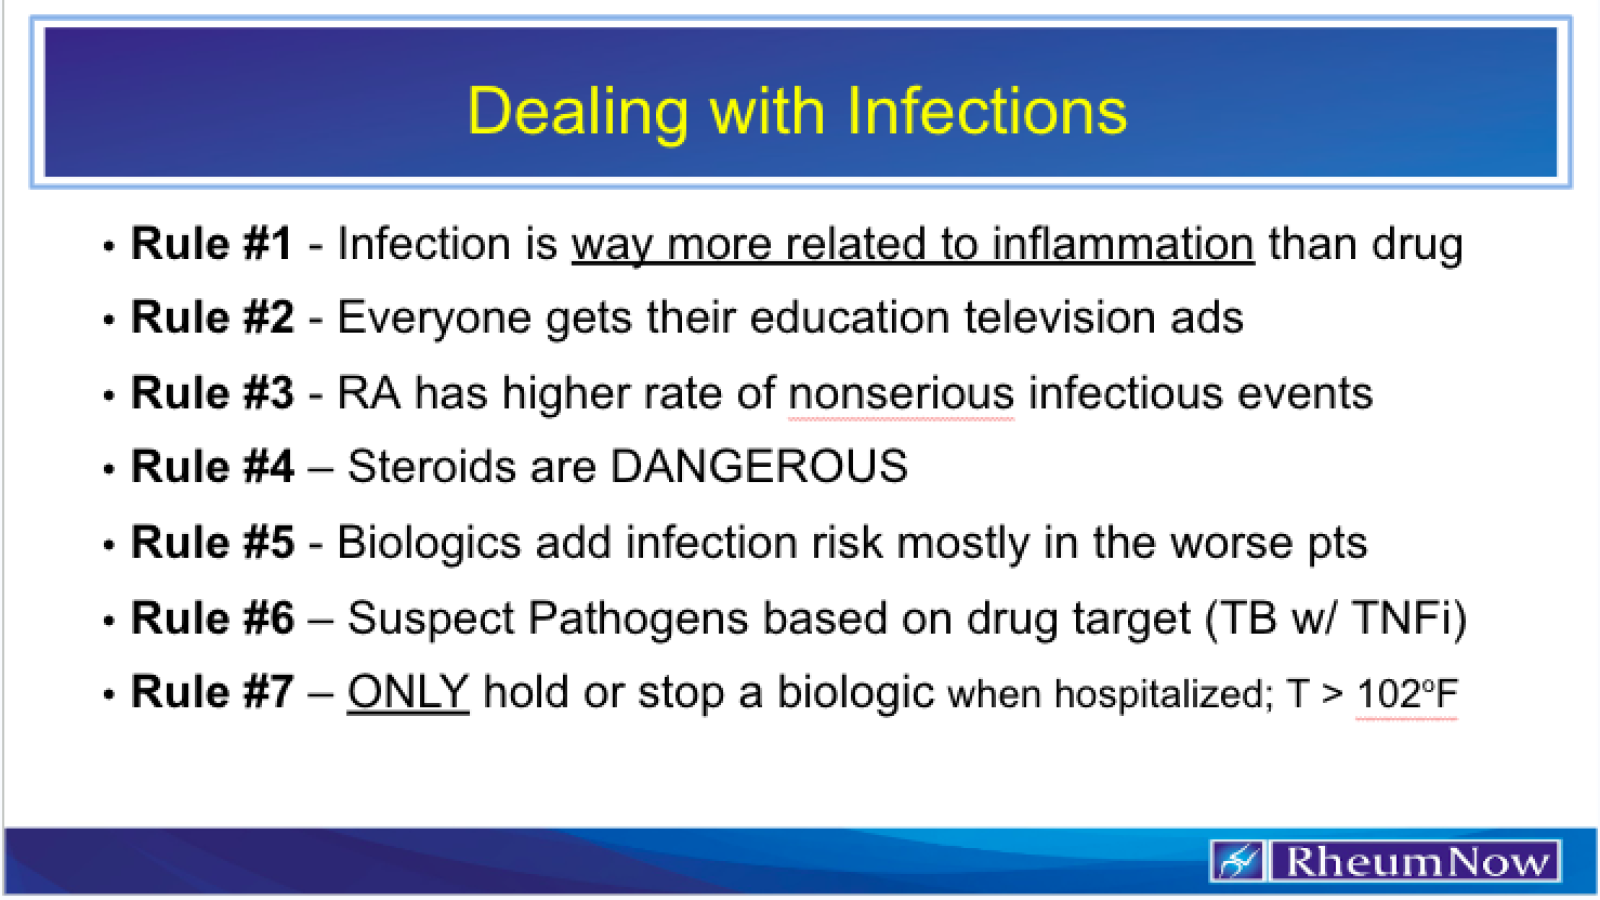 Dealing with infection